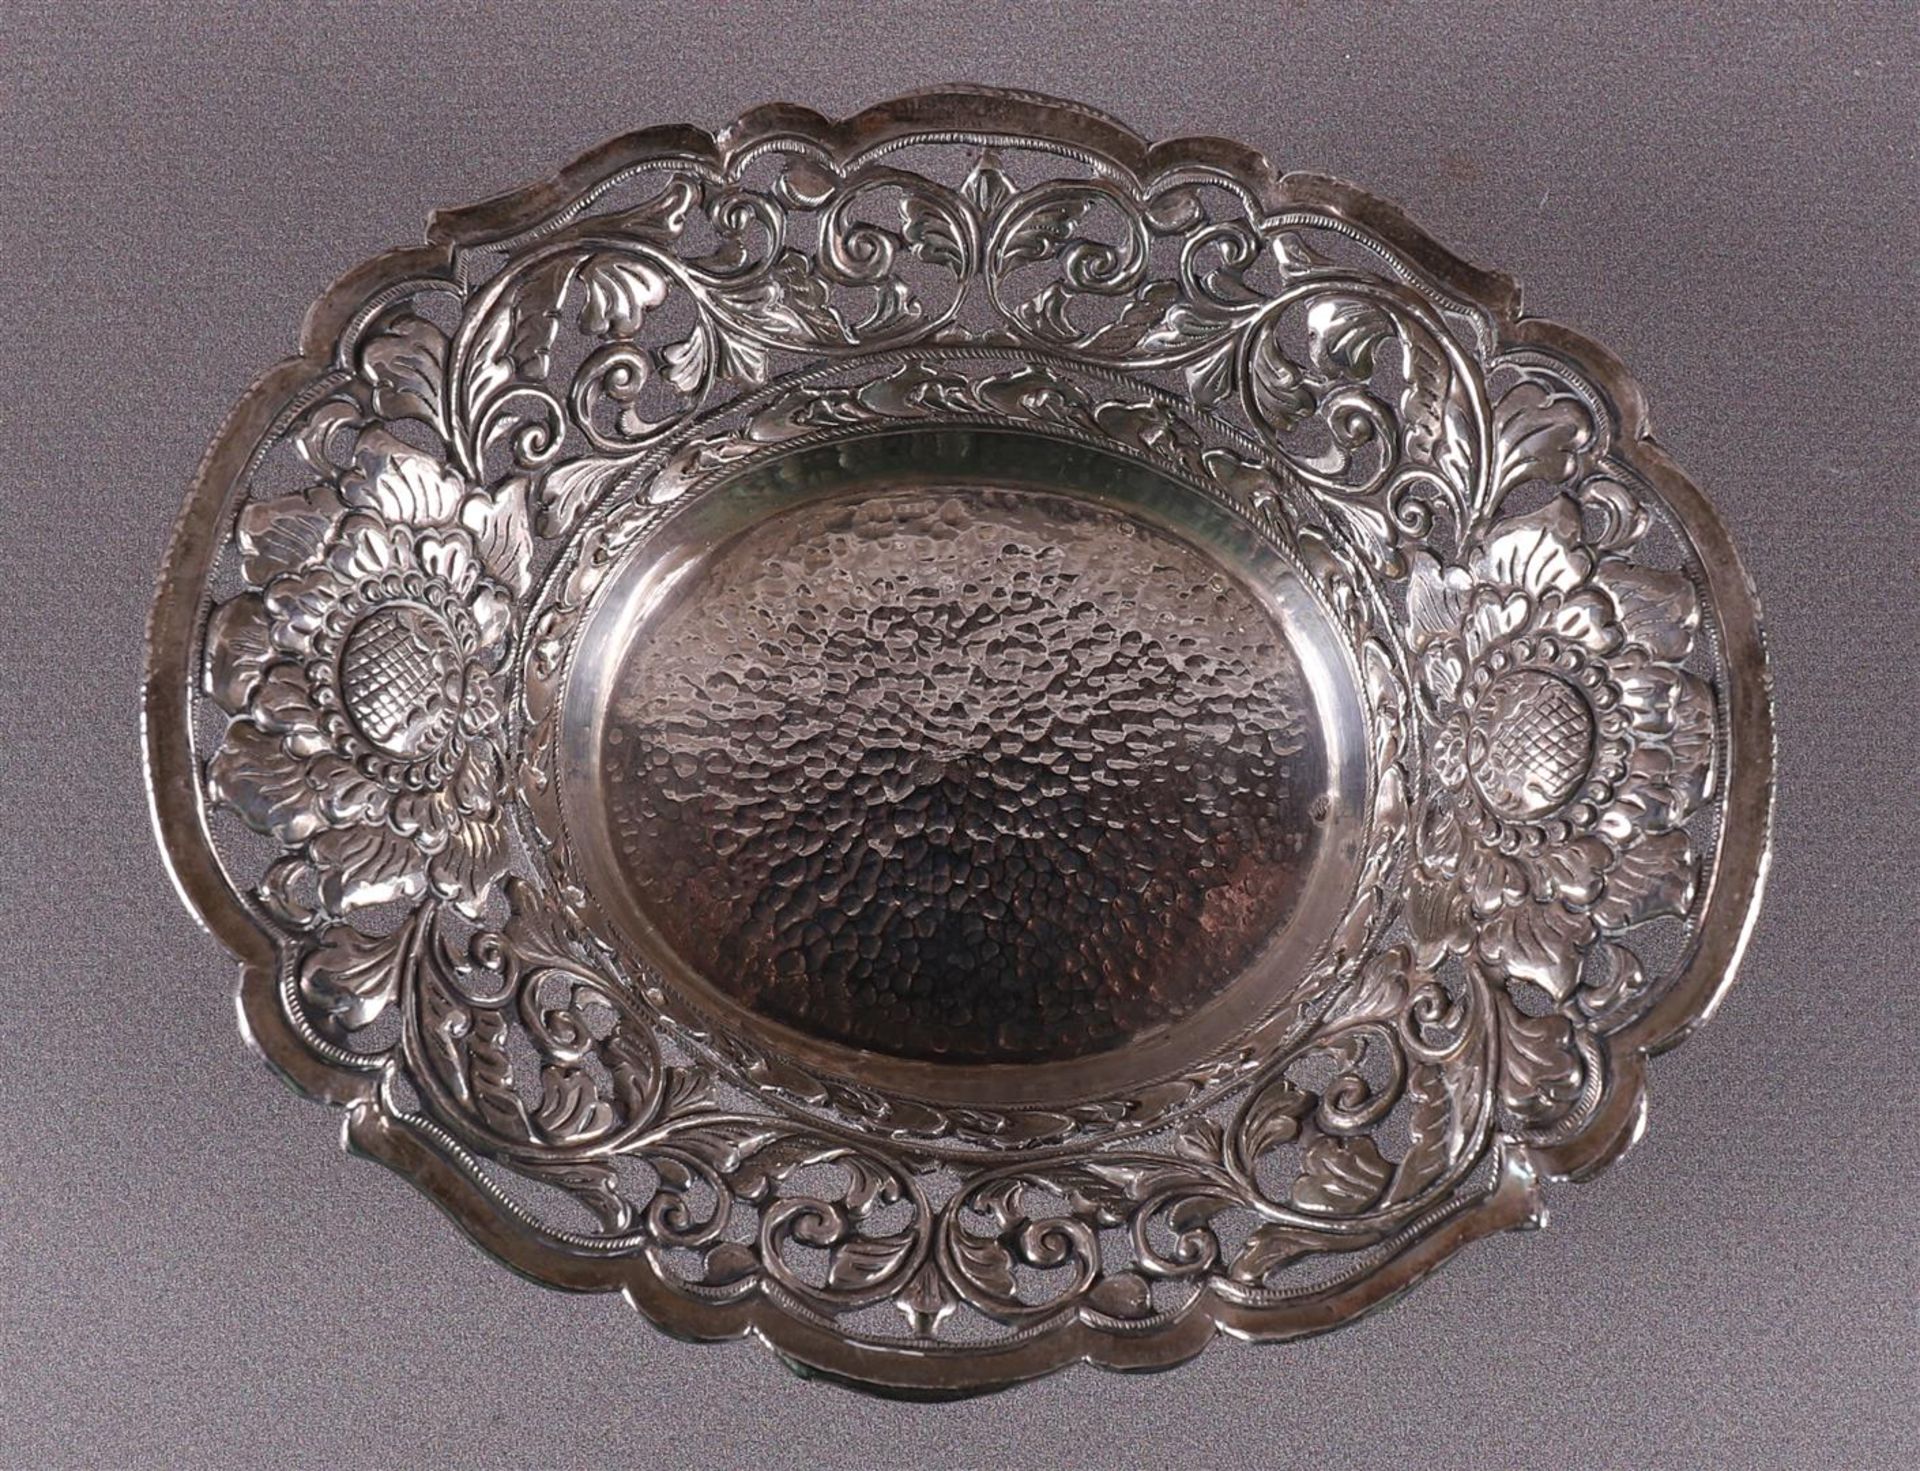 A silver oval pierced bonbonière with floral decor, Indonesia - Image 2 of 5